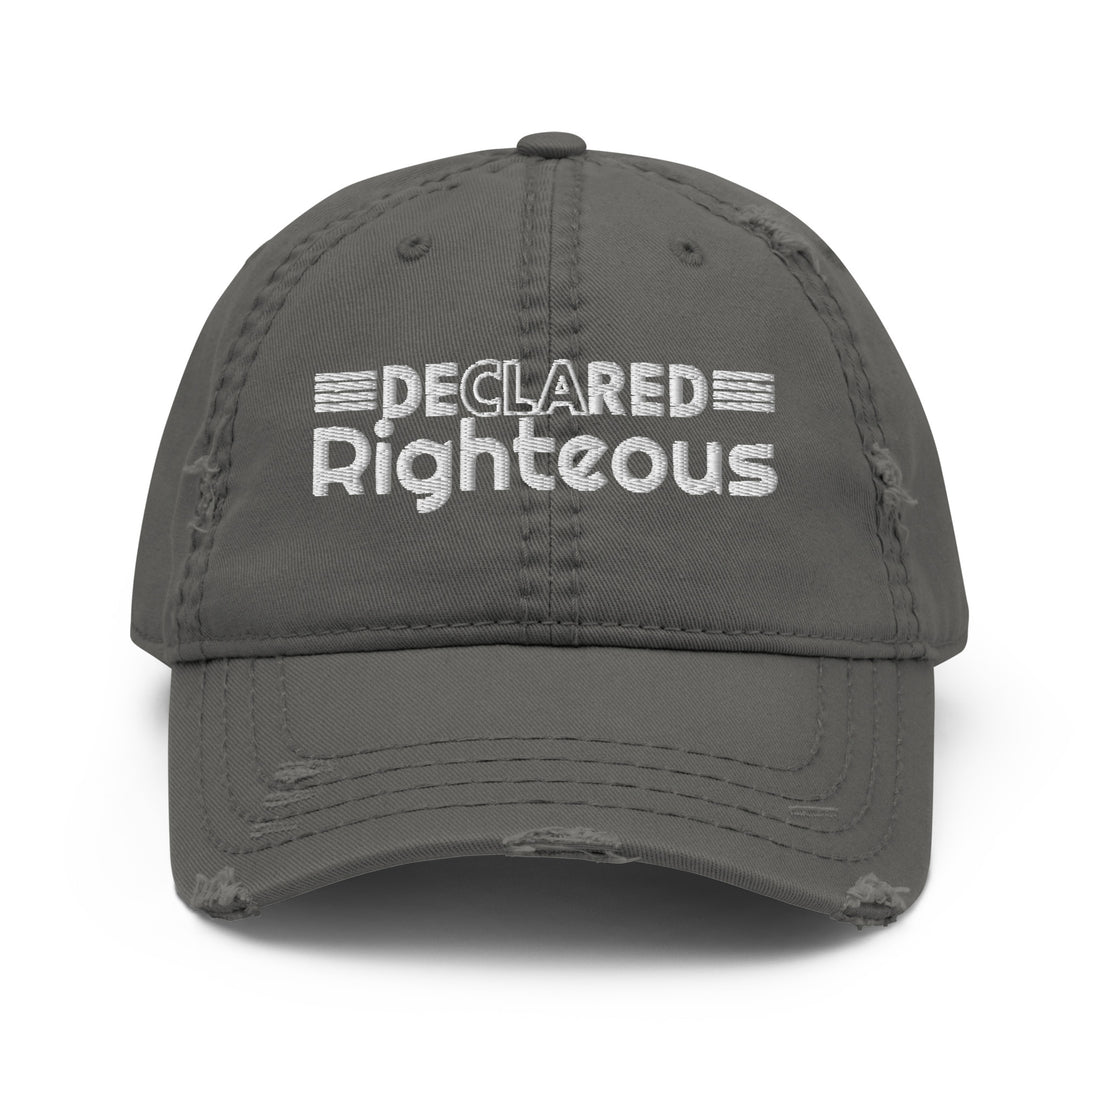 “Declared Righteous” Distressed Hat